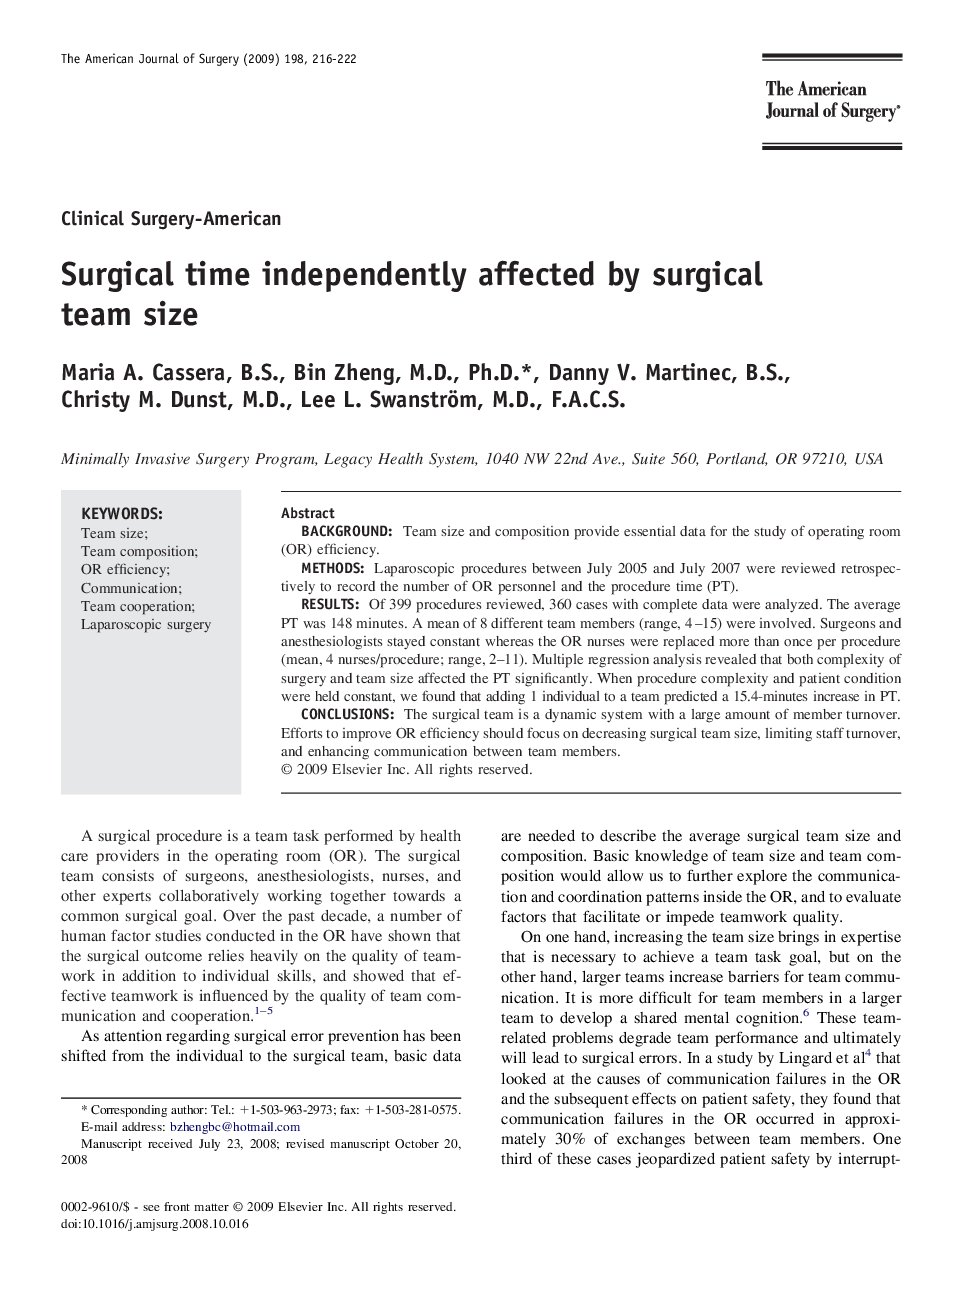 Surgical time independently affected by surgical team size